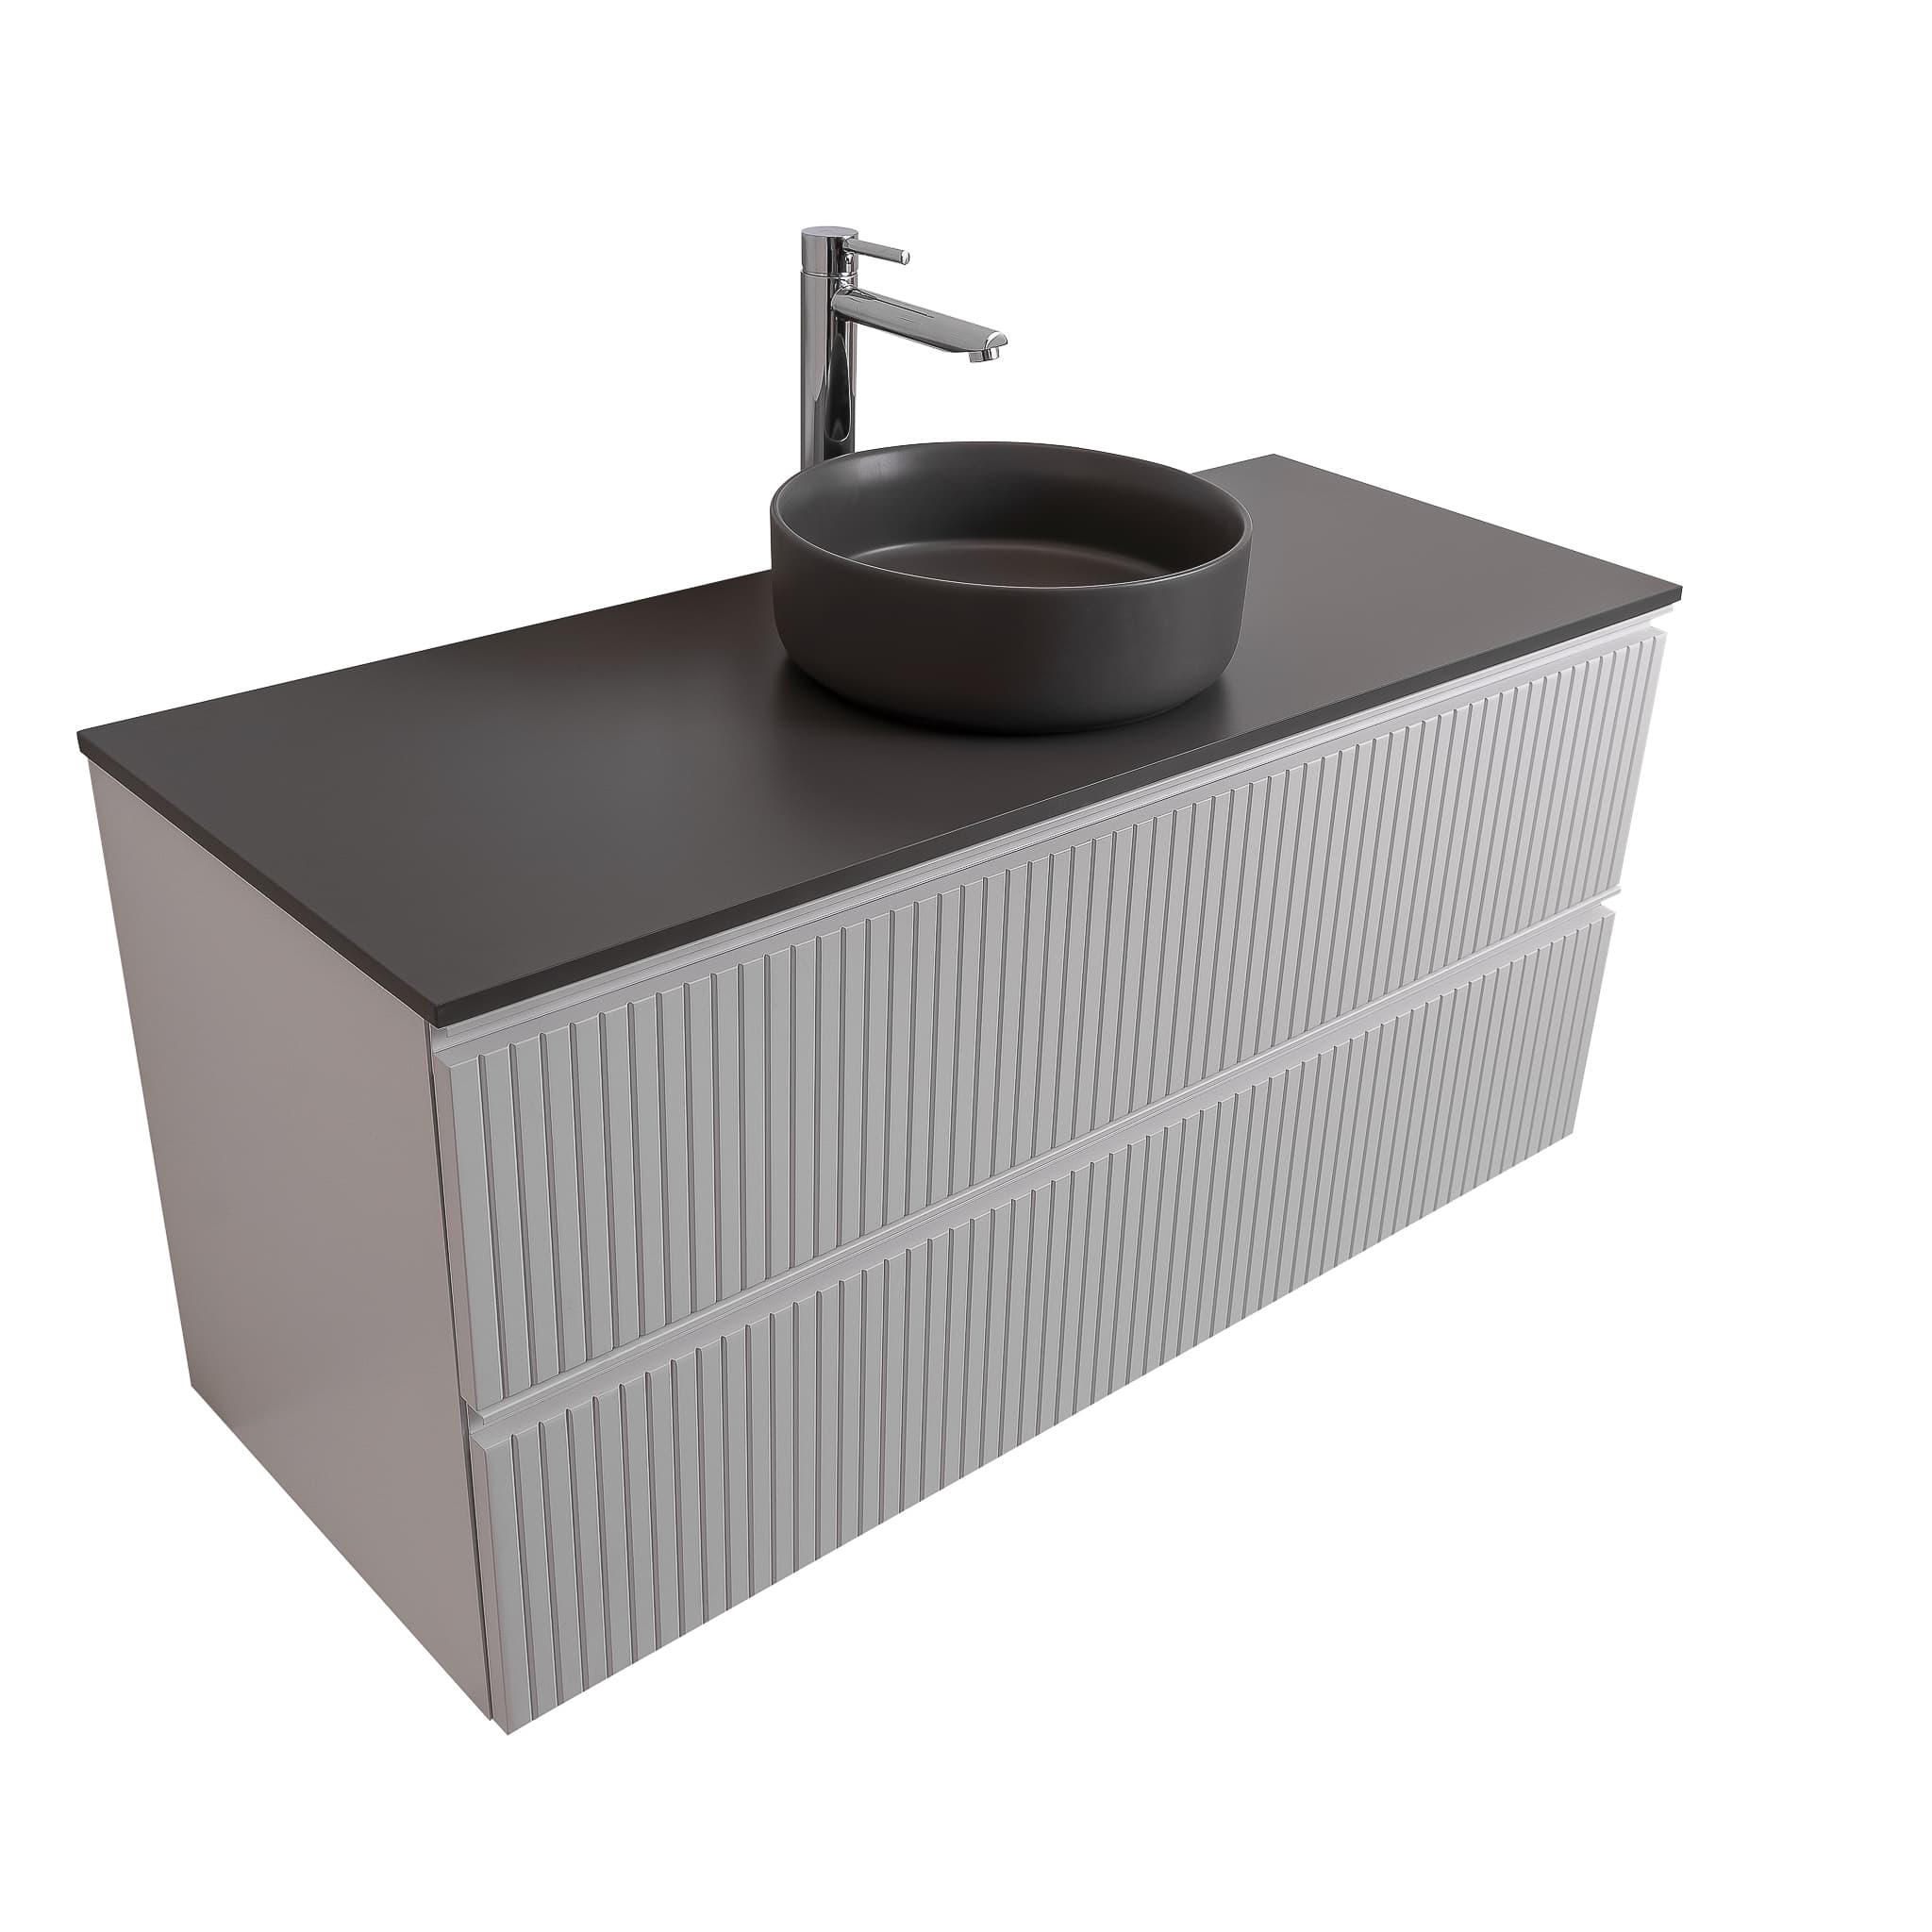 Ares 47.5 Matte White Cabinet, Ares Grey Ceniza Top And Ares Grey Ceniza Ceramic Basin, Wall Mounted Modern Vanity Set